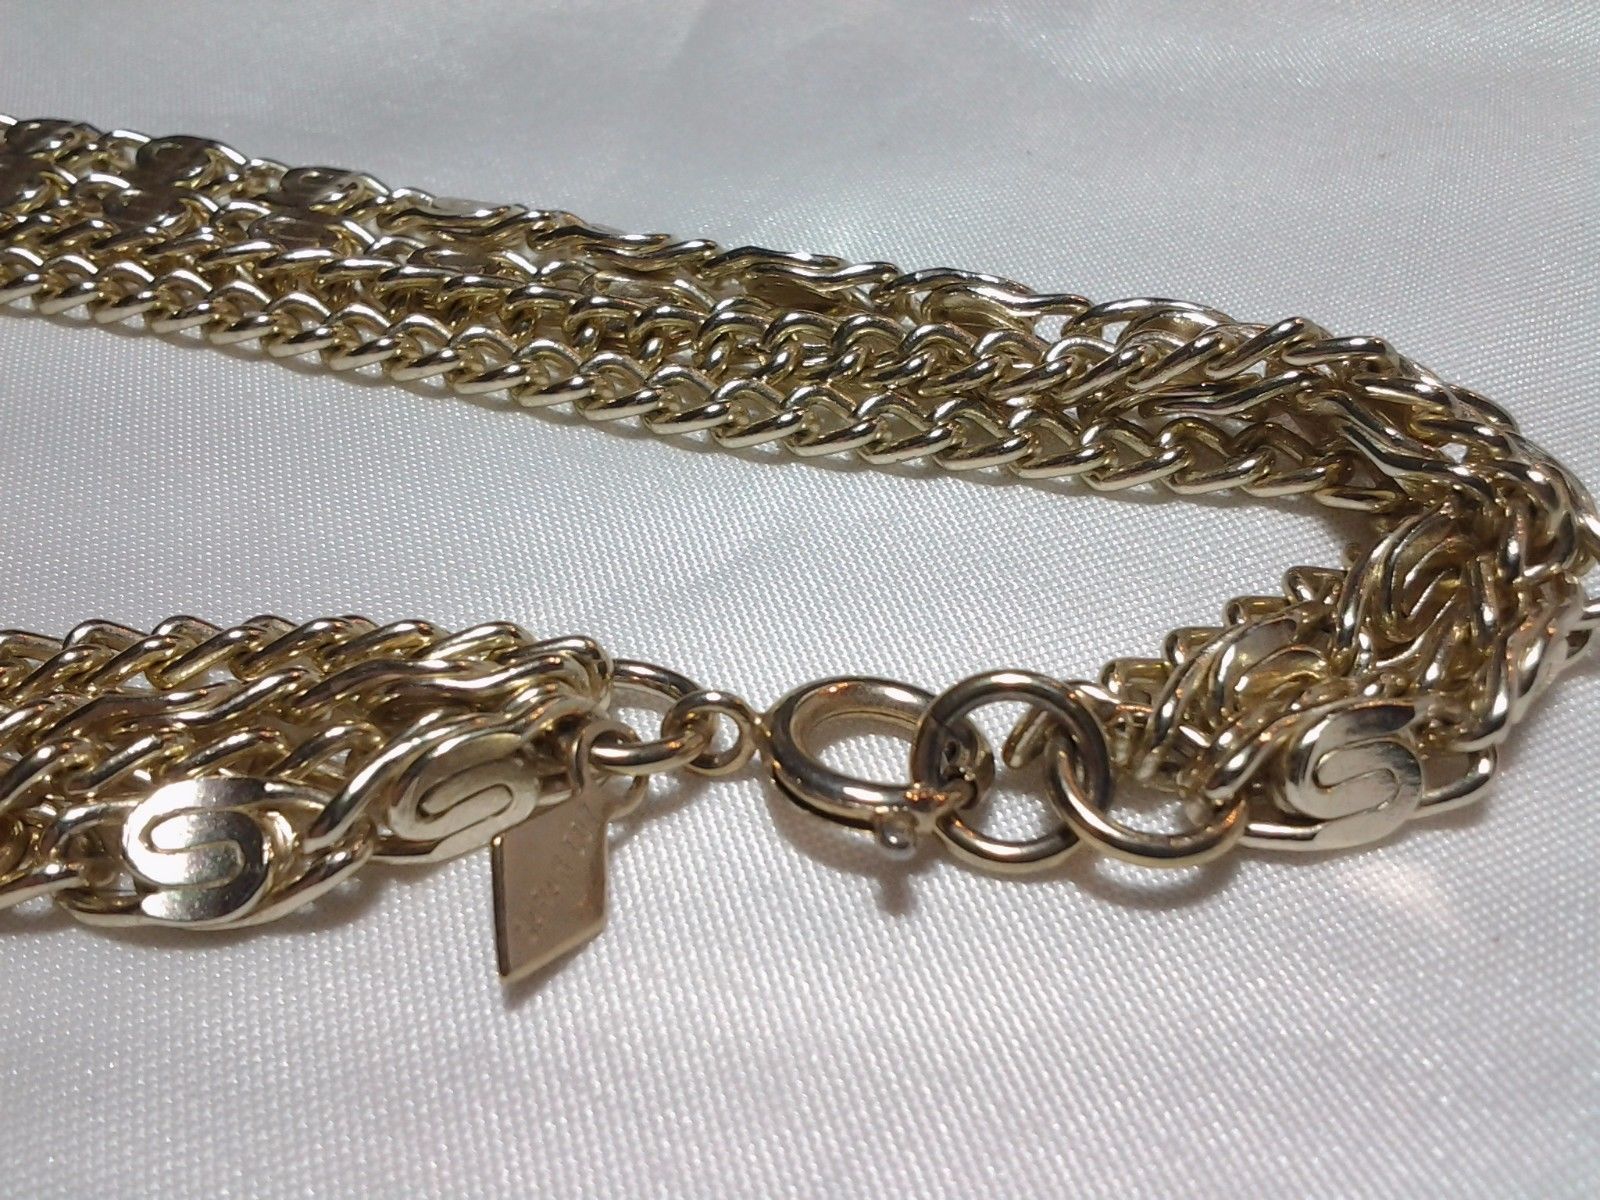 how to clean a necklace chain